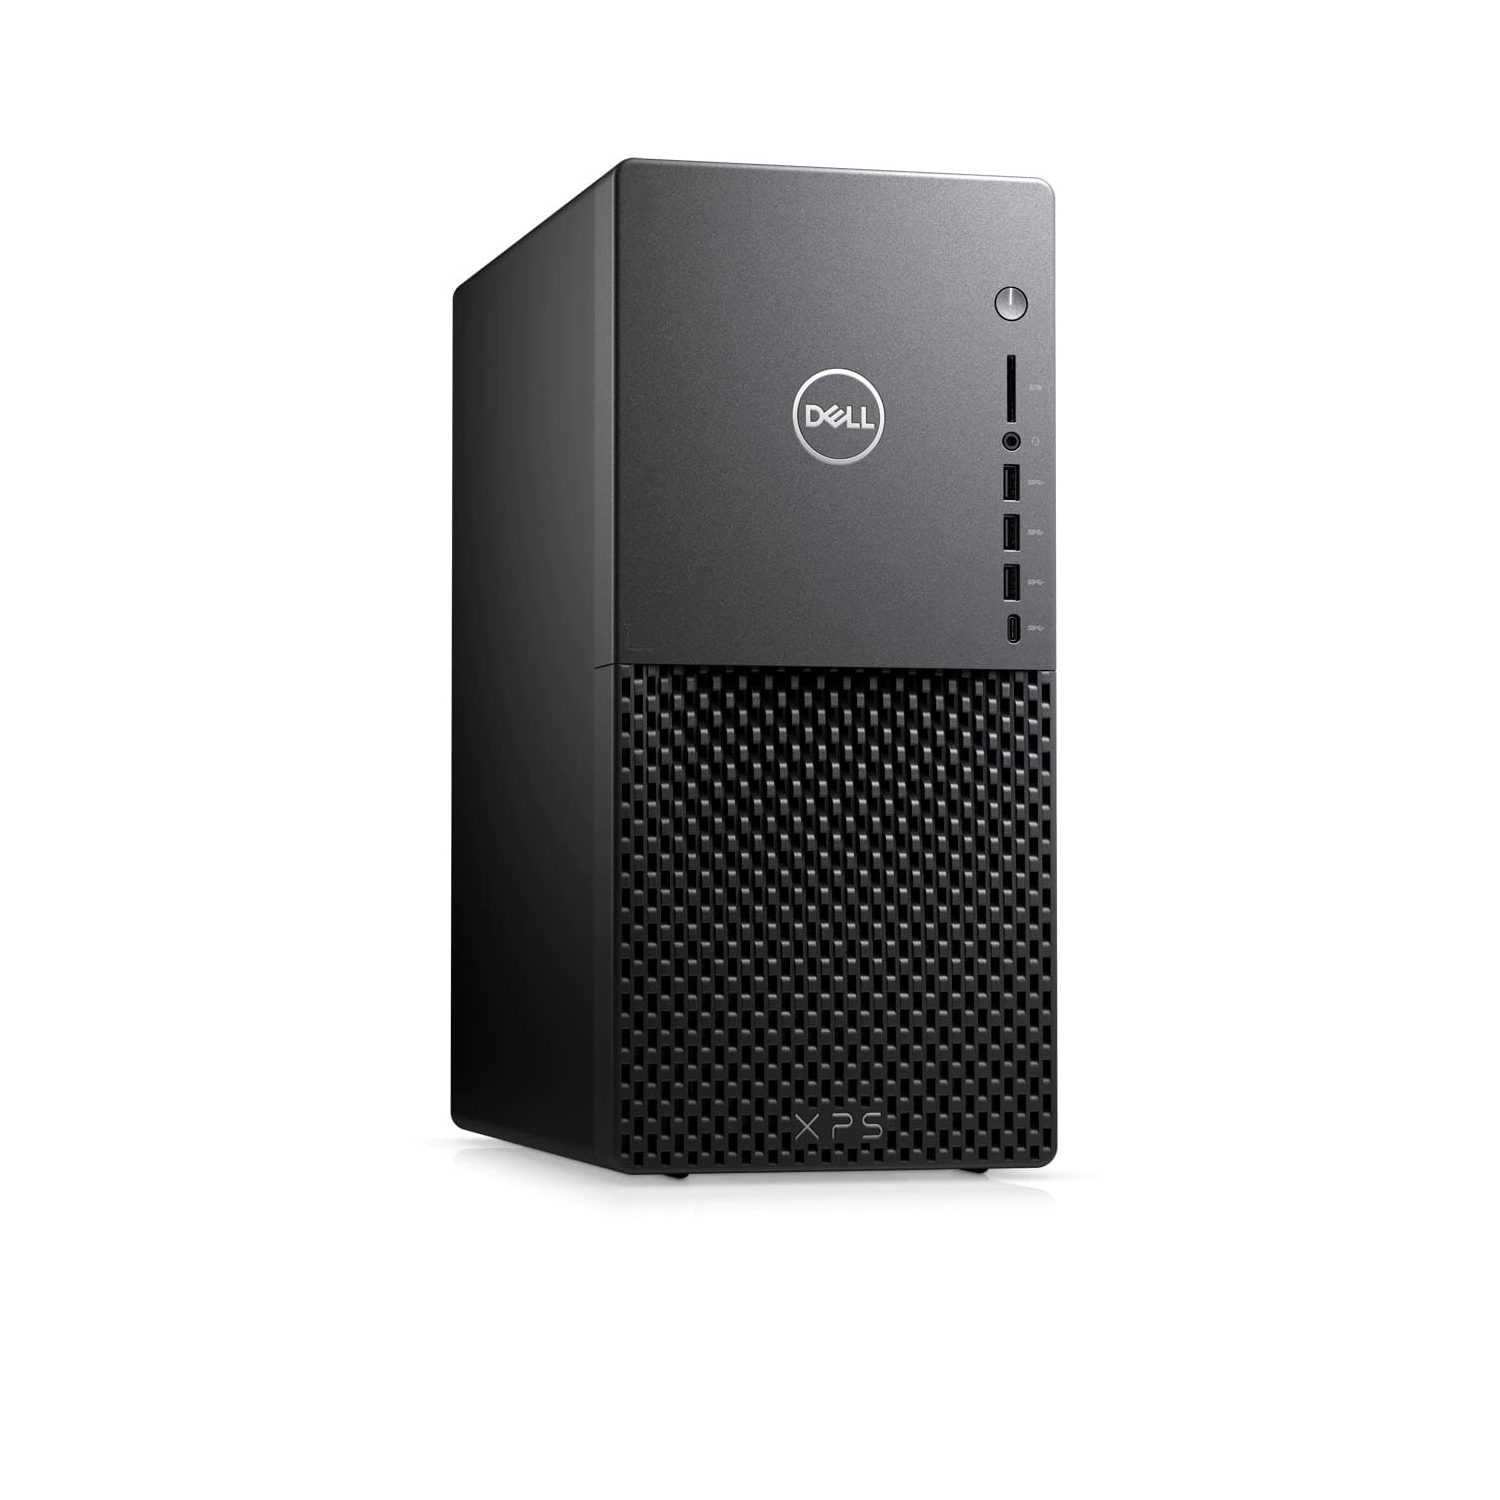 Refurbished (Excellent) - Dell XPS 8940 Desktop (2020) | Core i7 - 1TB SSD - 32GB RAM | 8 Cores @ 4.9 GHz - 11th Gen CPU Certified Refurbished